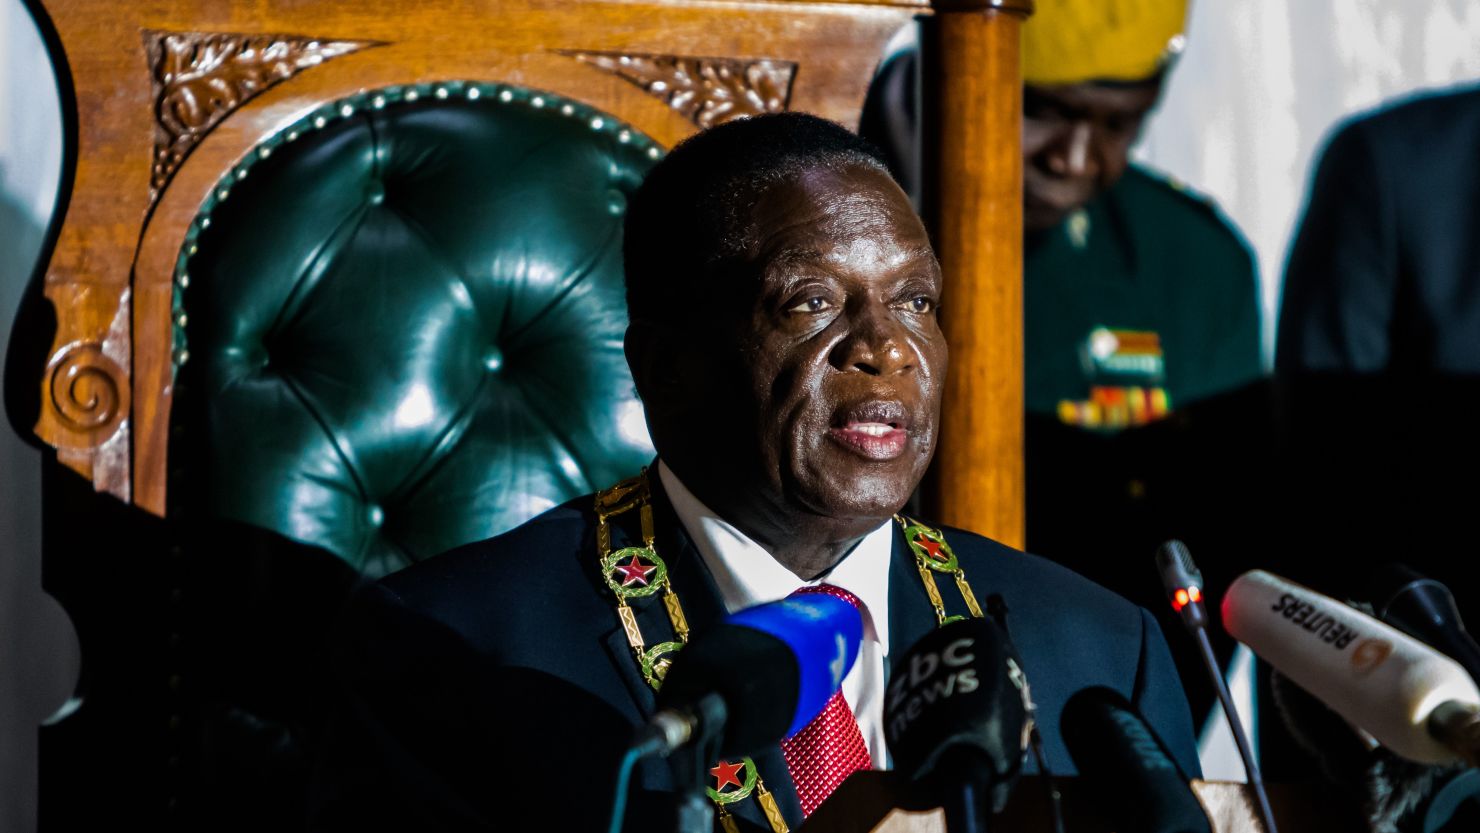 Zimbabwean President Emmerson Mnangagwa delivers his state of the nation address at a joint sitting of the parliament and the senate in Harare on December 20, 2017.